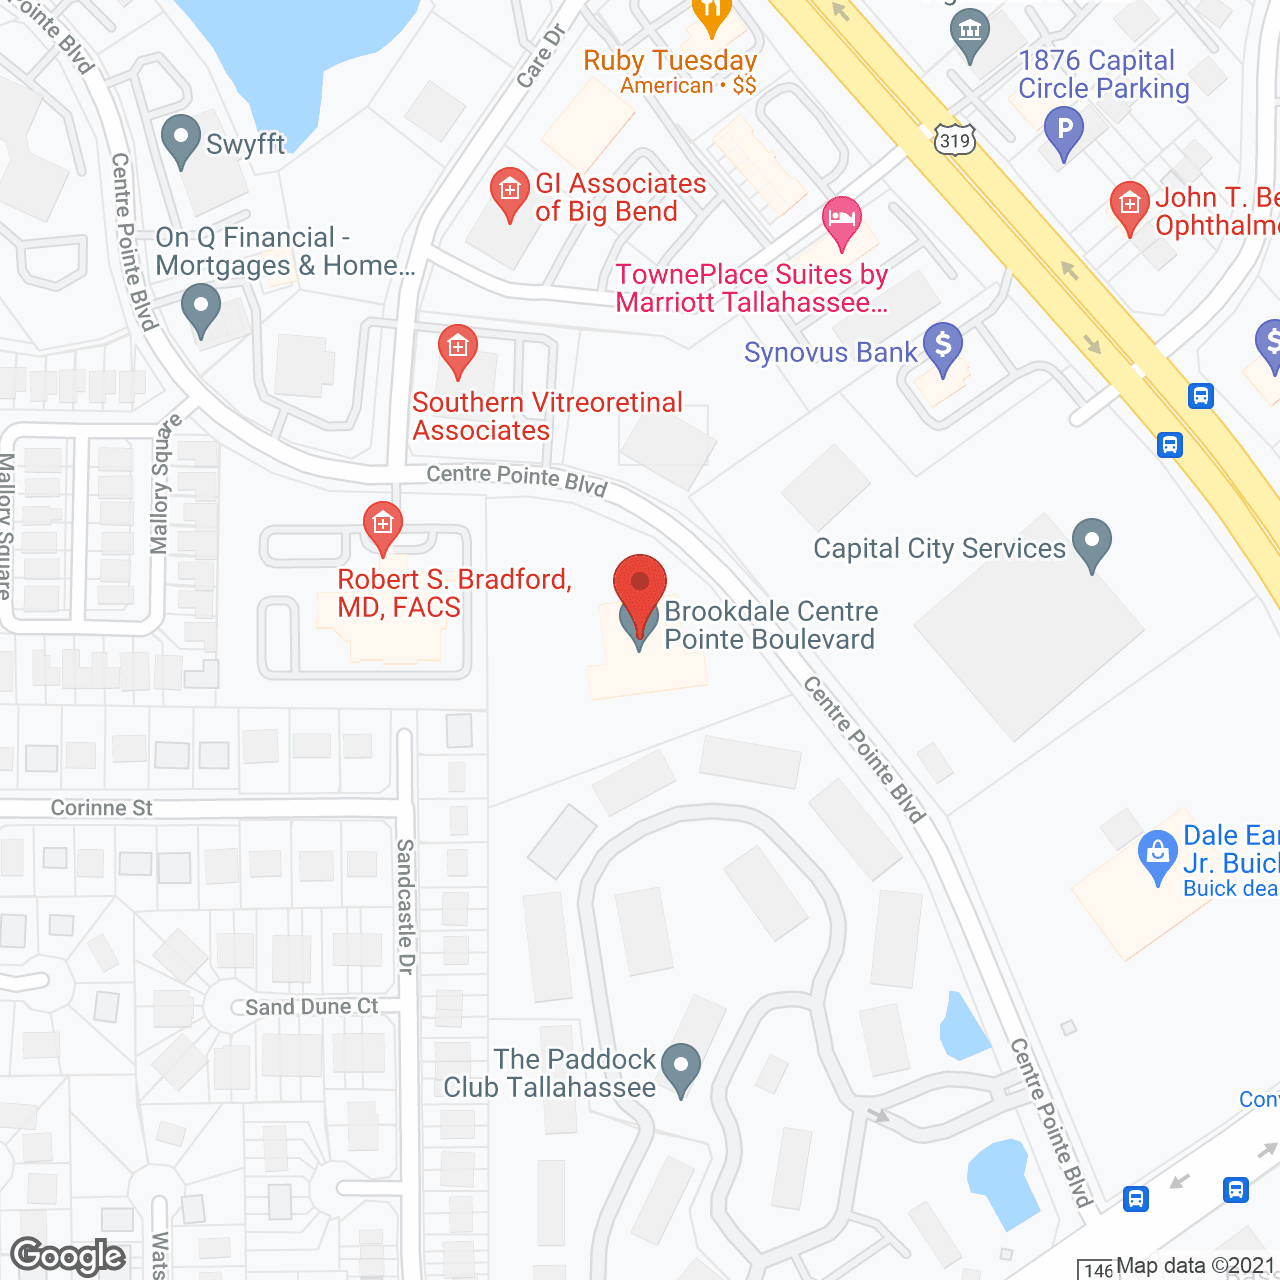 Brookdale Centre Pointe Boulevard in google map